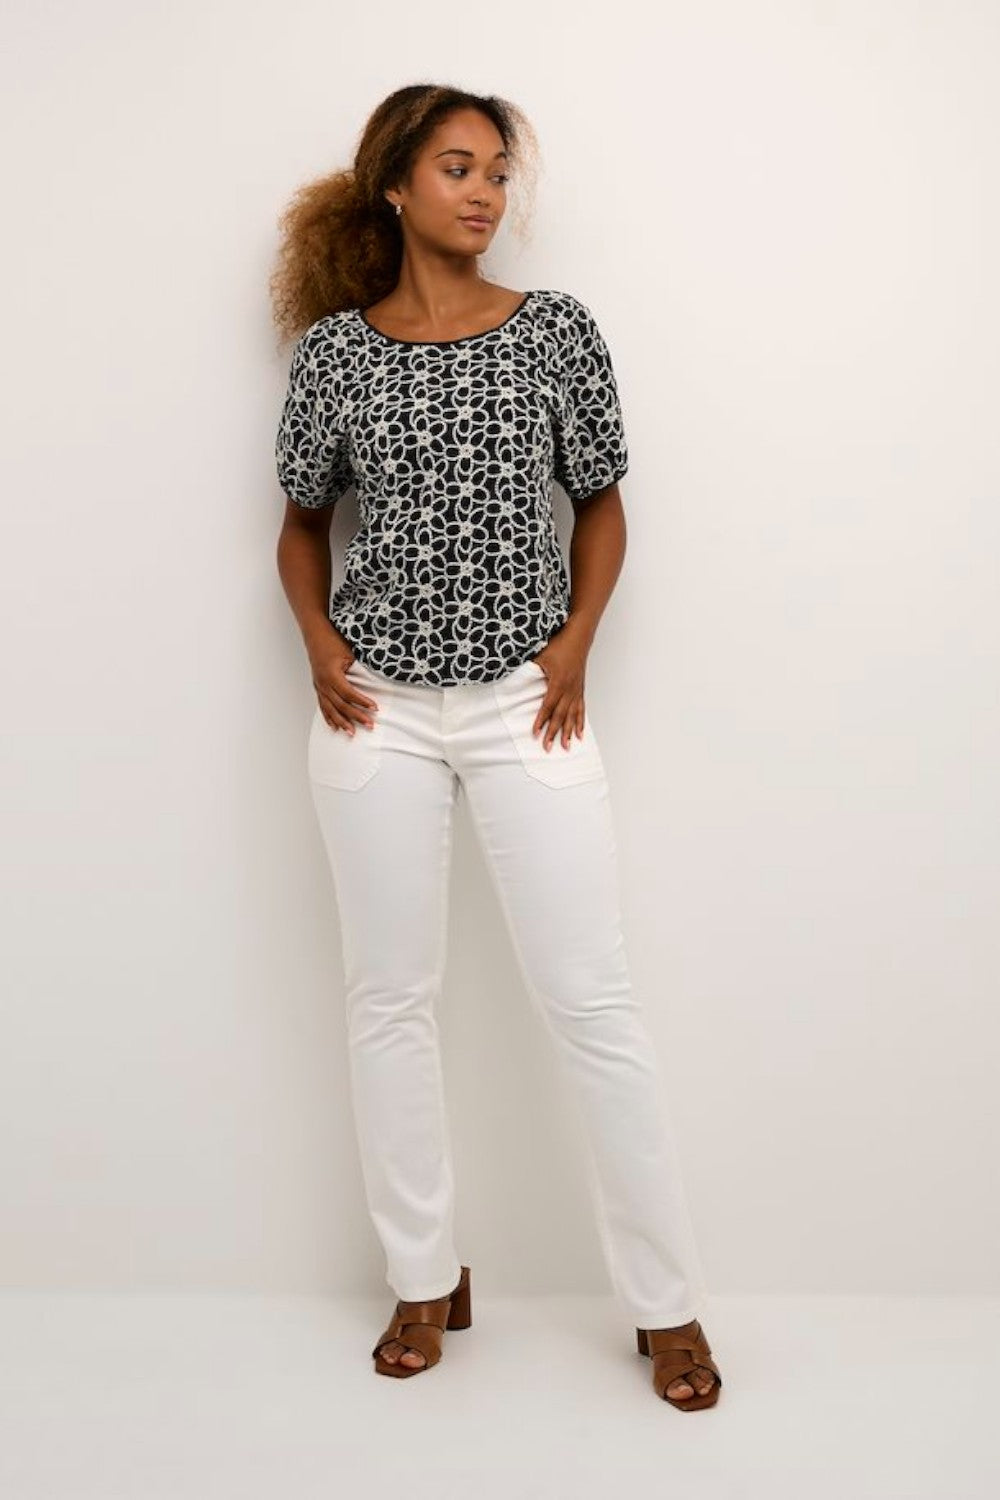 Discover the aesthetic appeal of this short-sleeved blouse. Crafted in a regular fit from woven fabric, it dazzles with a beautiful embroidered flower design. Style it with dark jeans or chic trousers for a complete look.